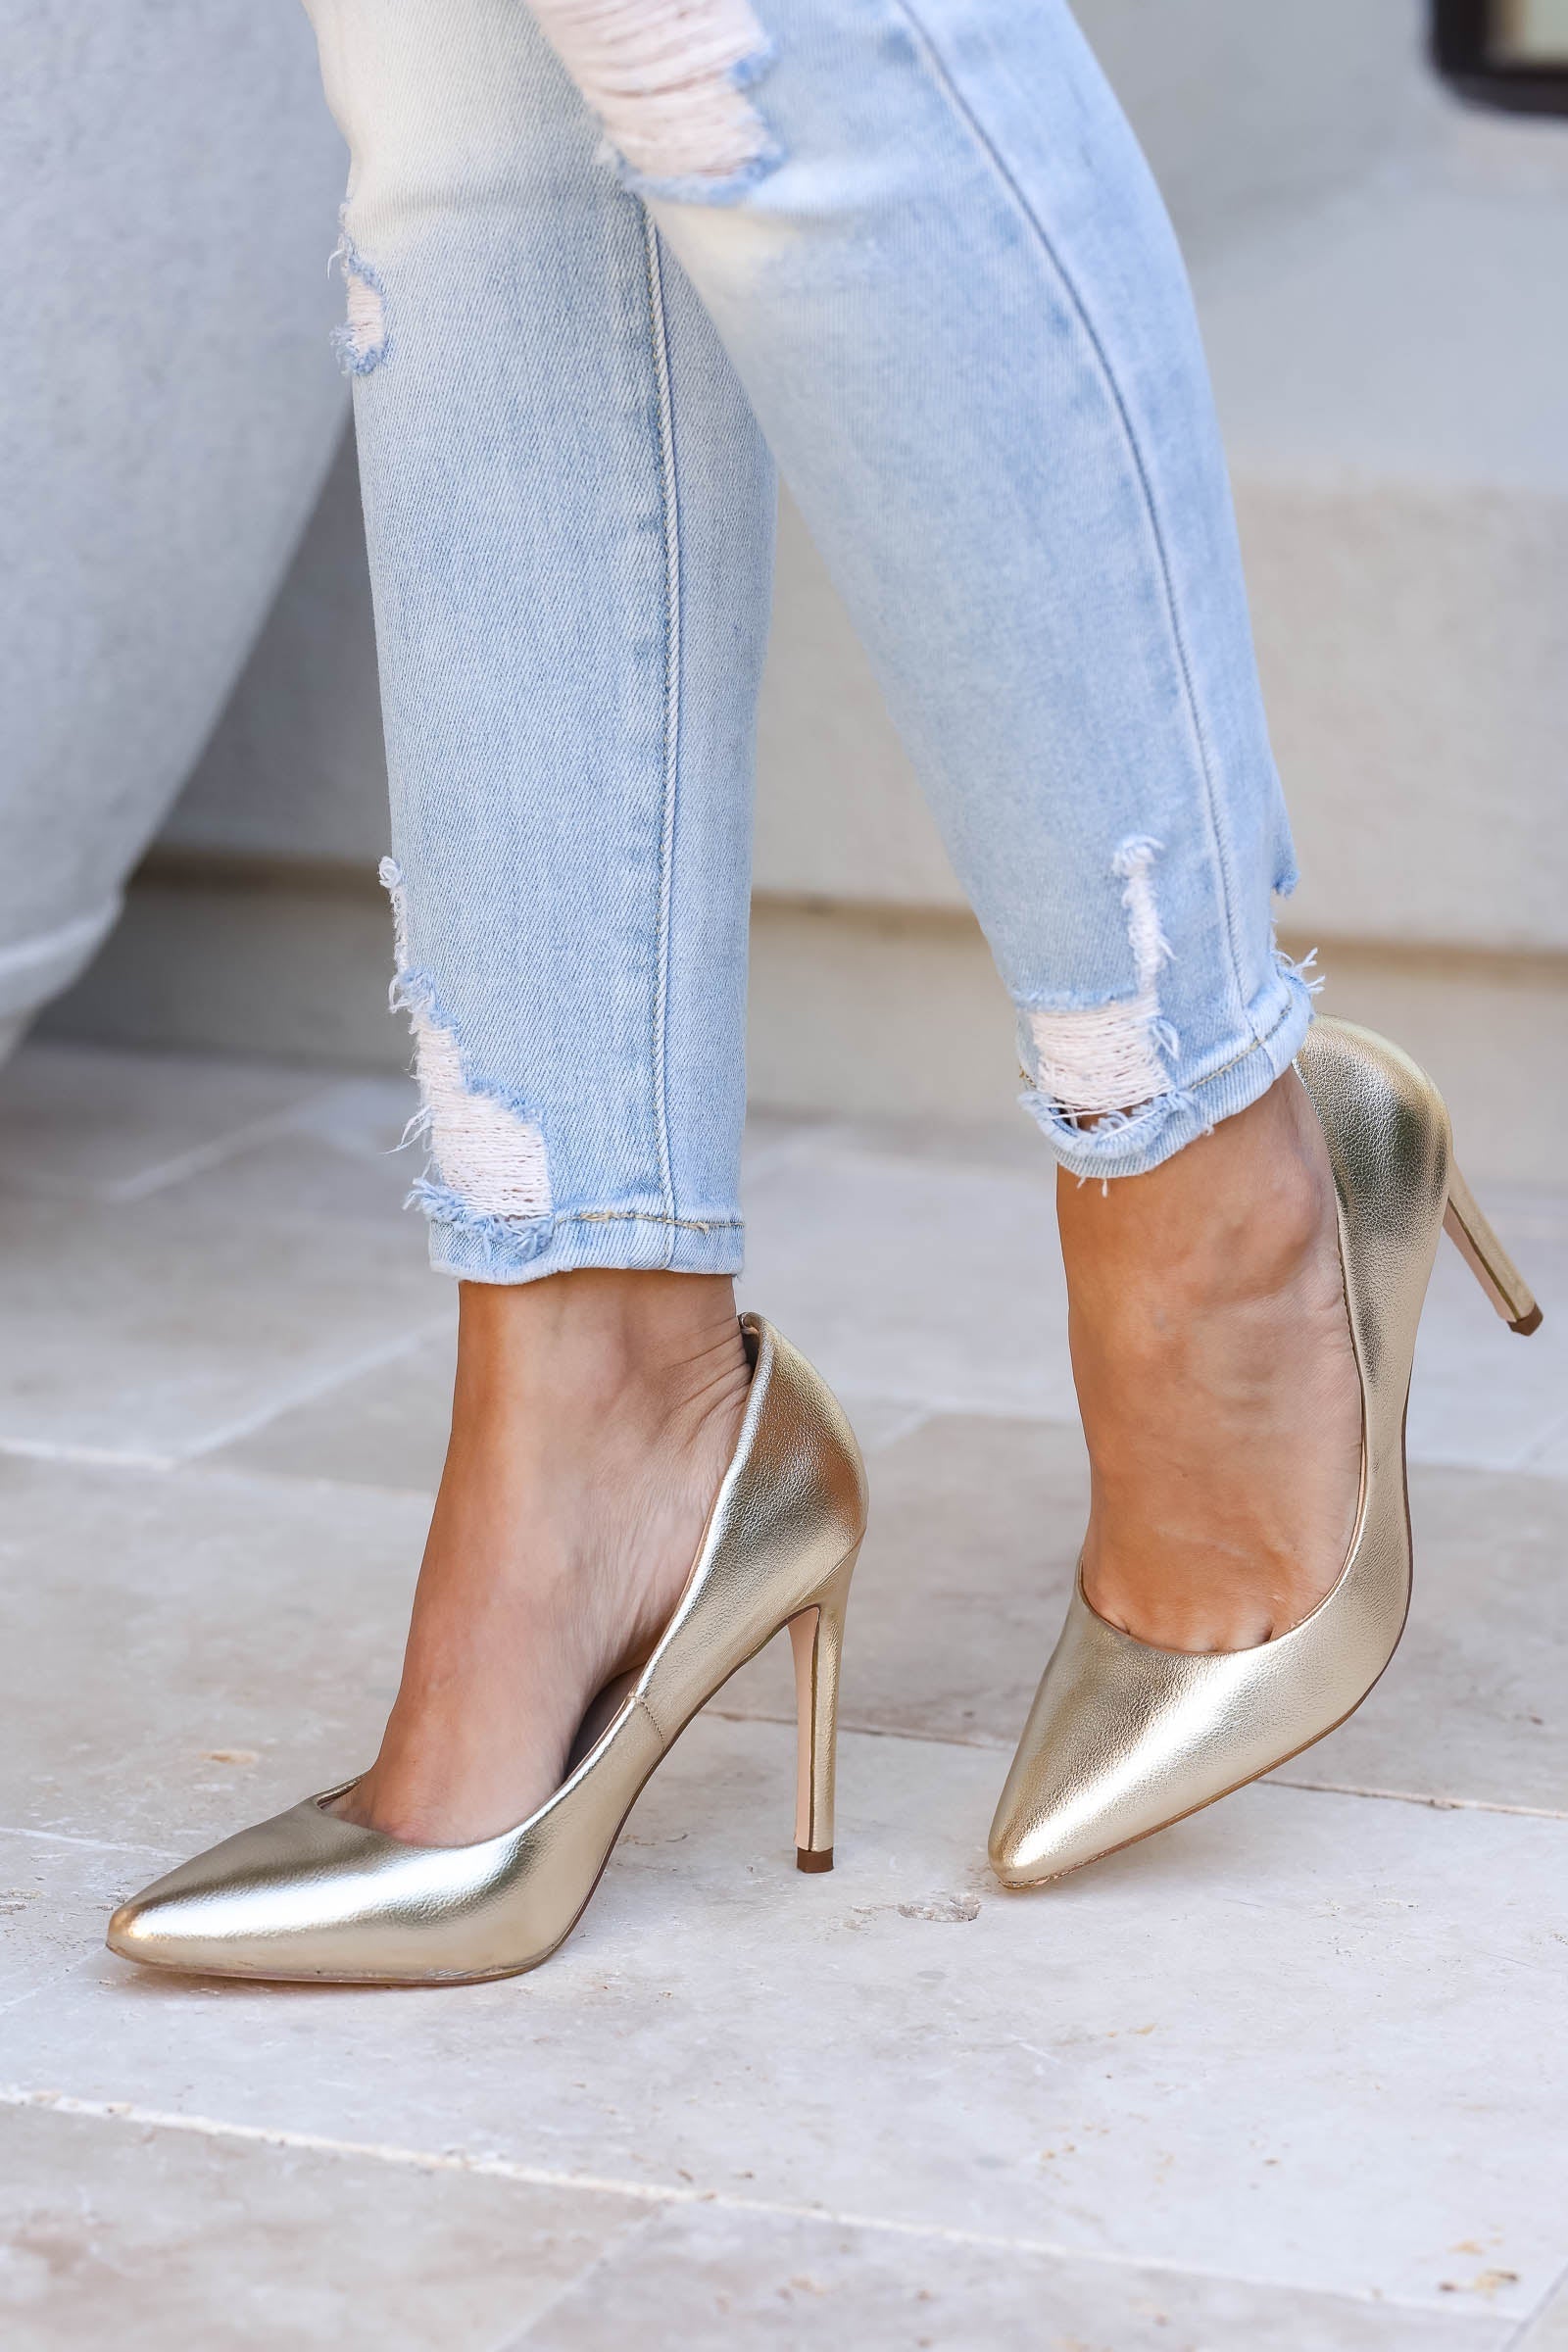 Elegant White Pointed Pumps with Gold Details